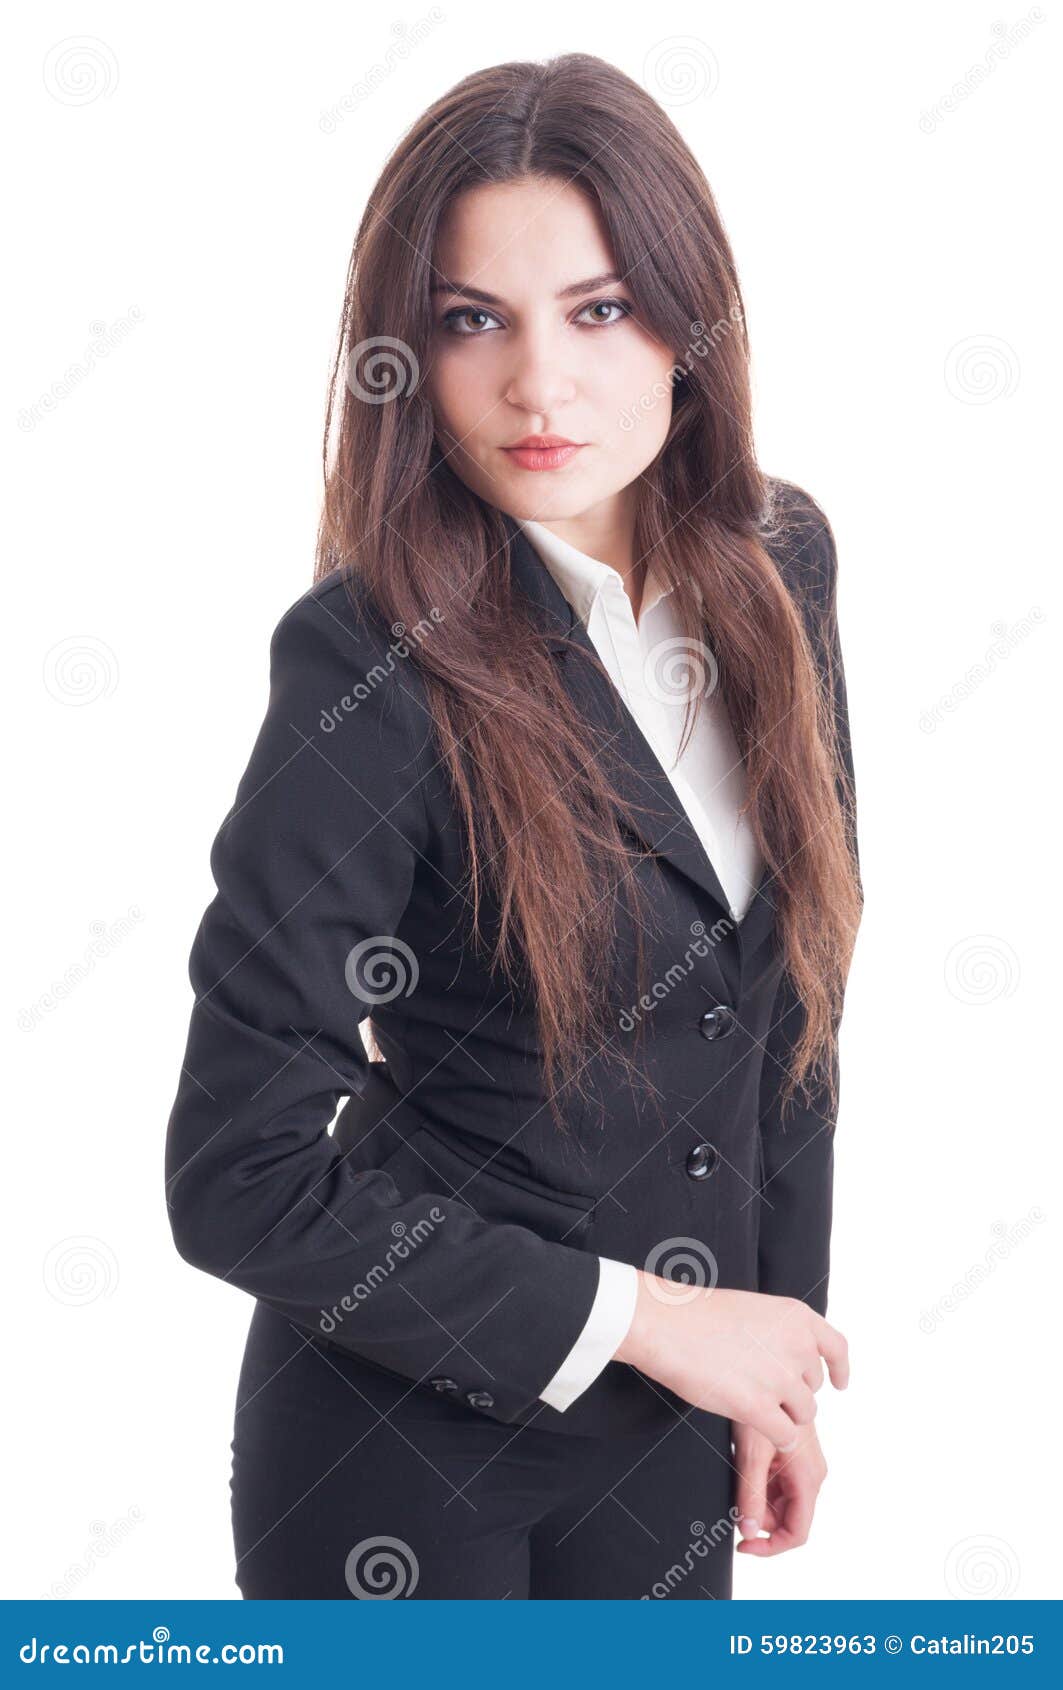 Young Business Woman with Attitude Stock Image - Image of agent, people ...